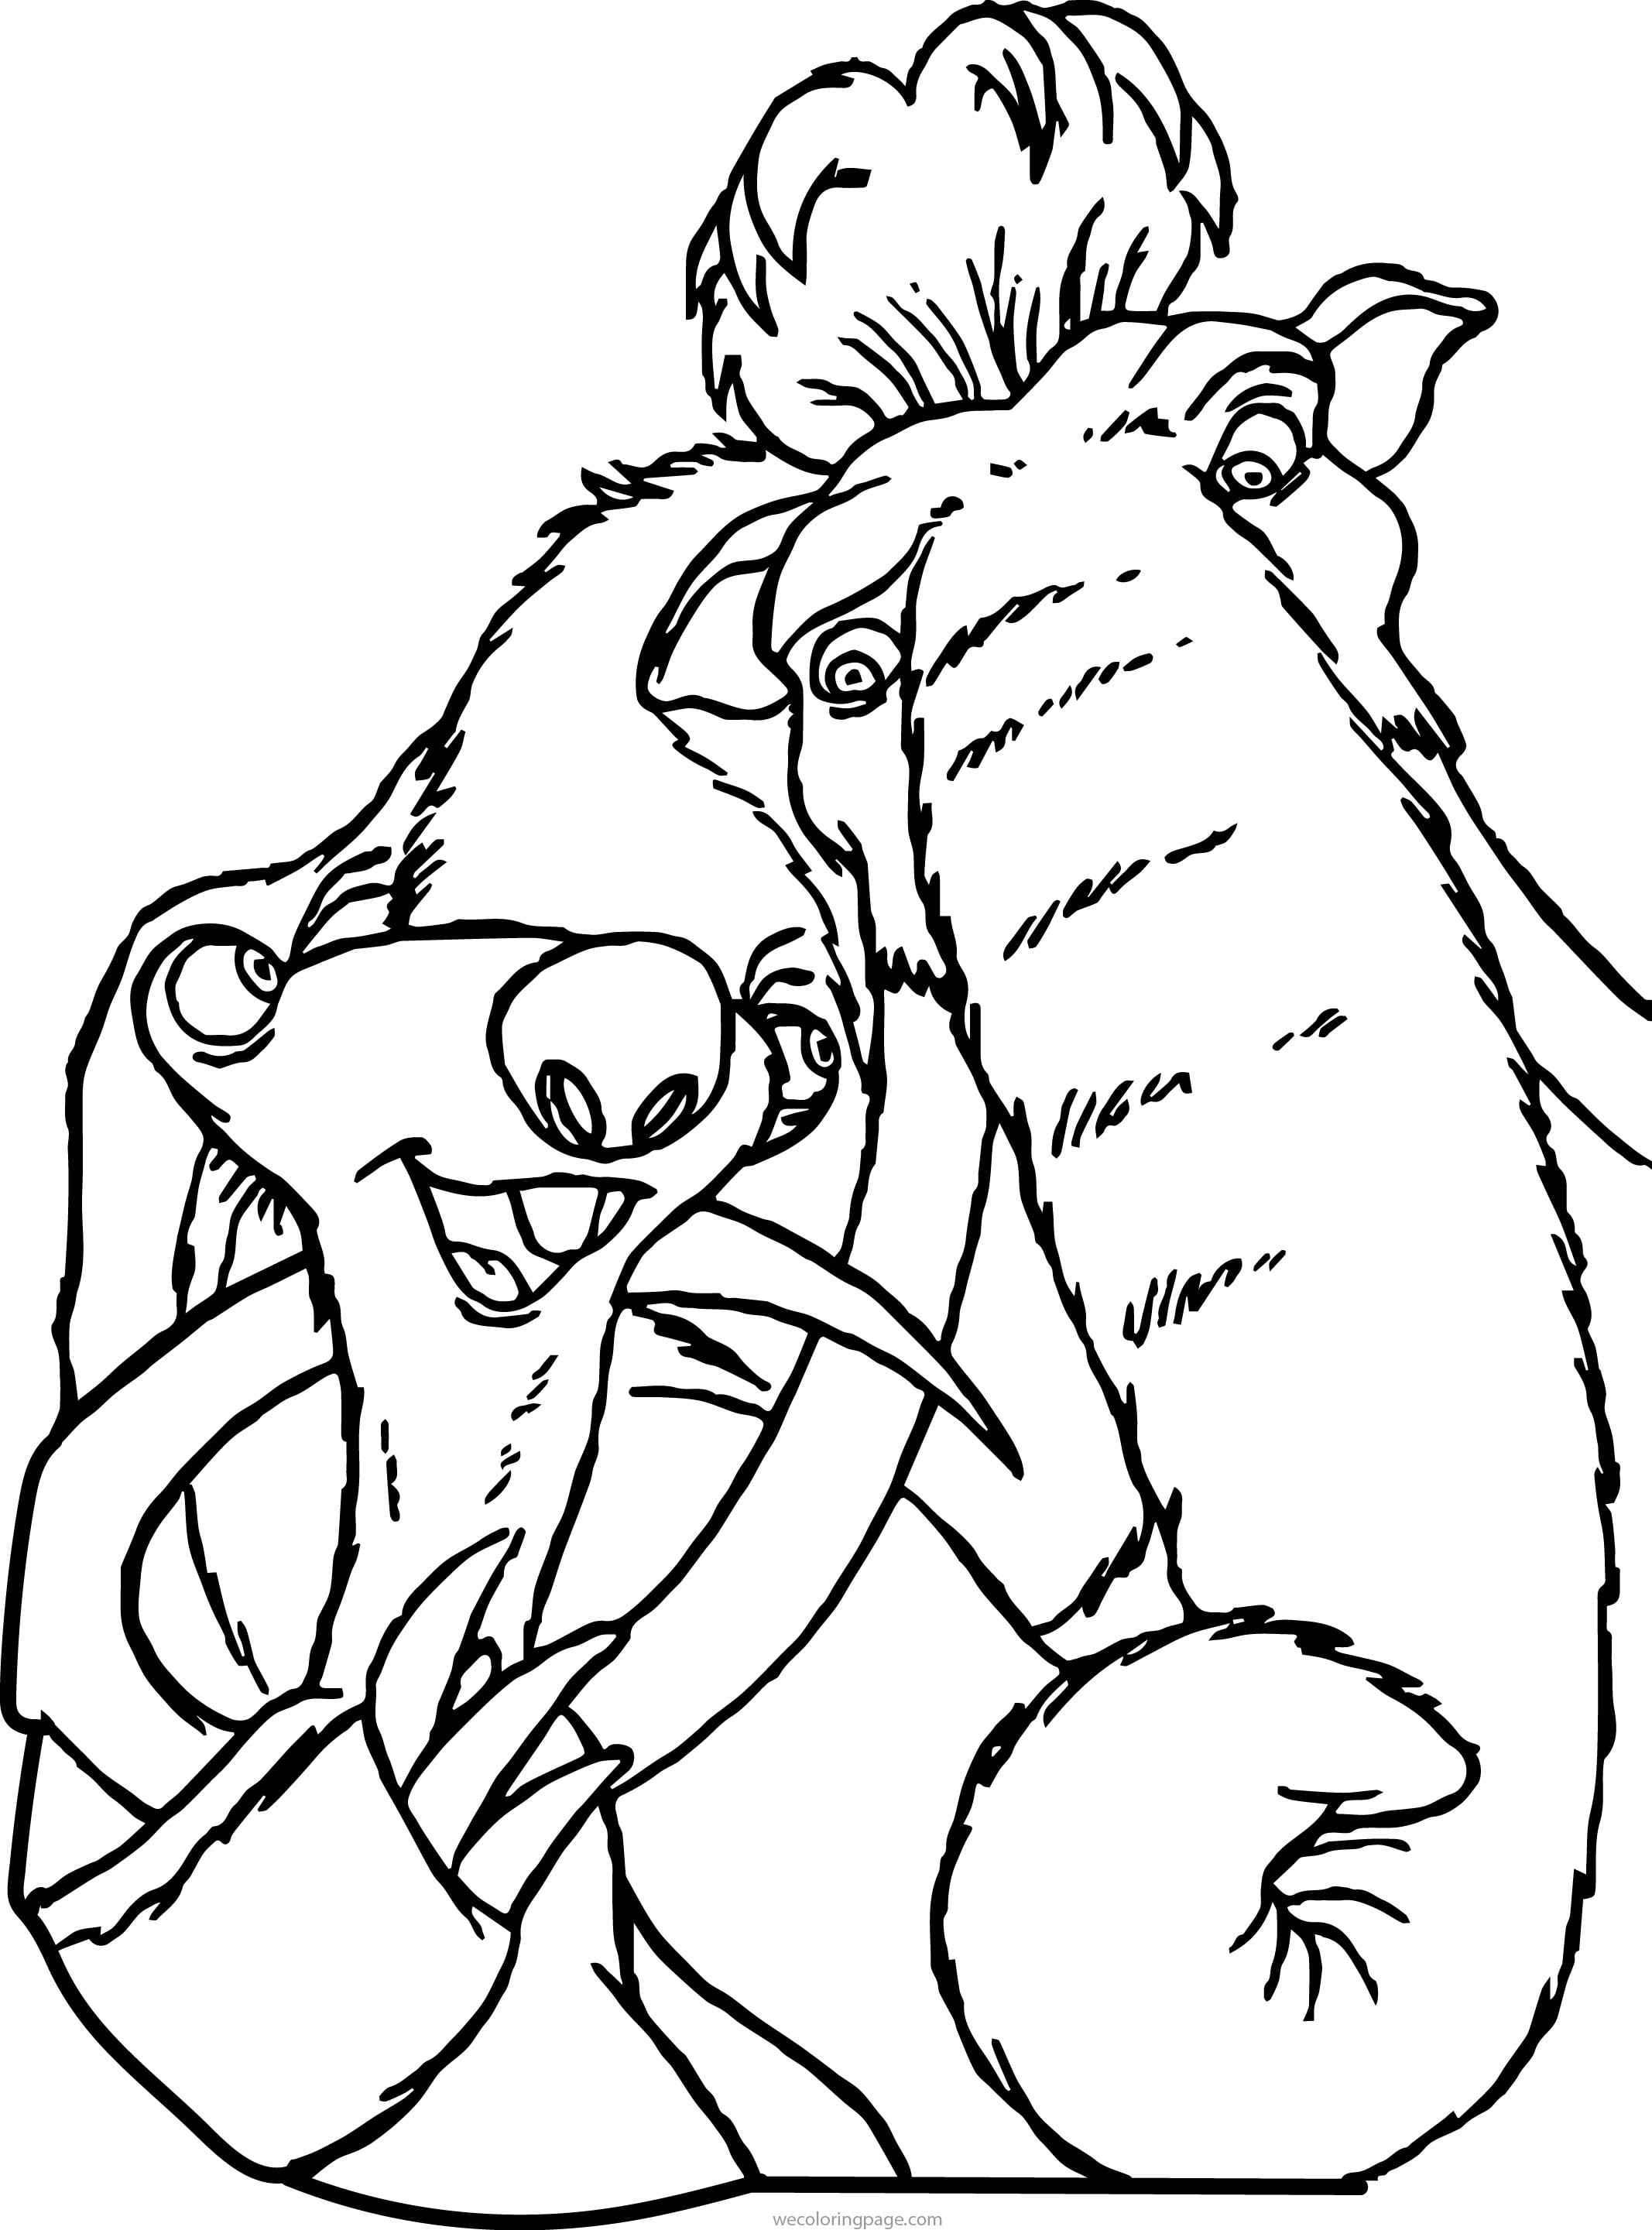 Ice Age Sid And Manny Talking Coloring Pages